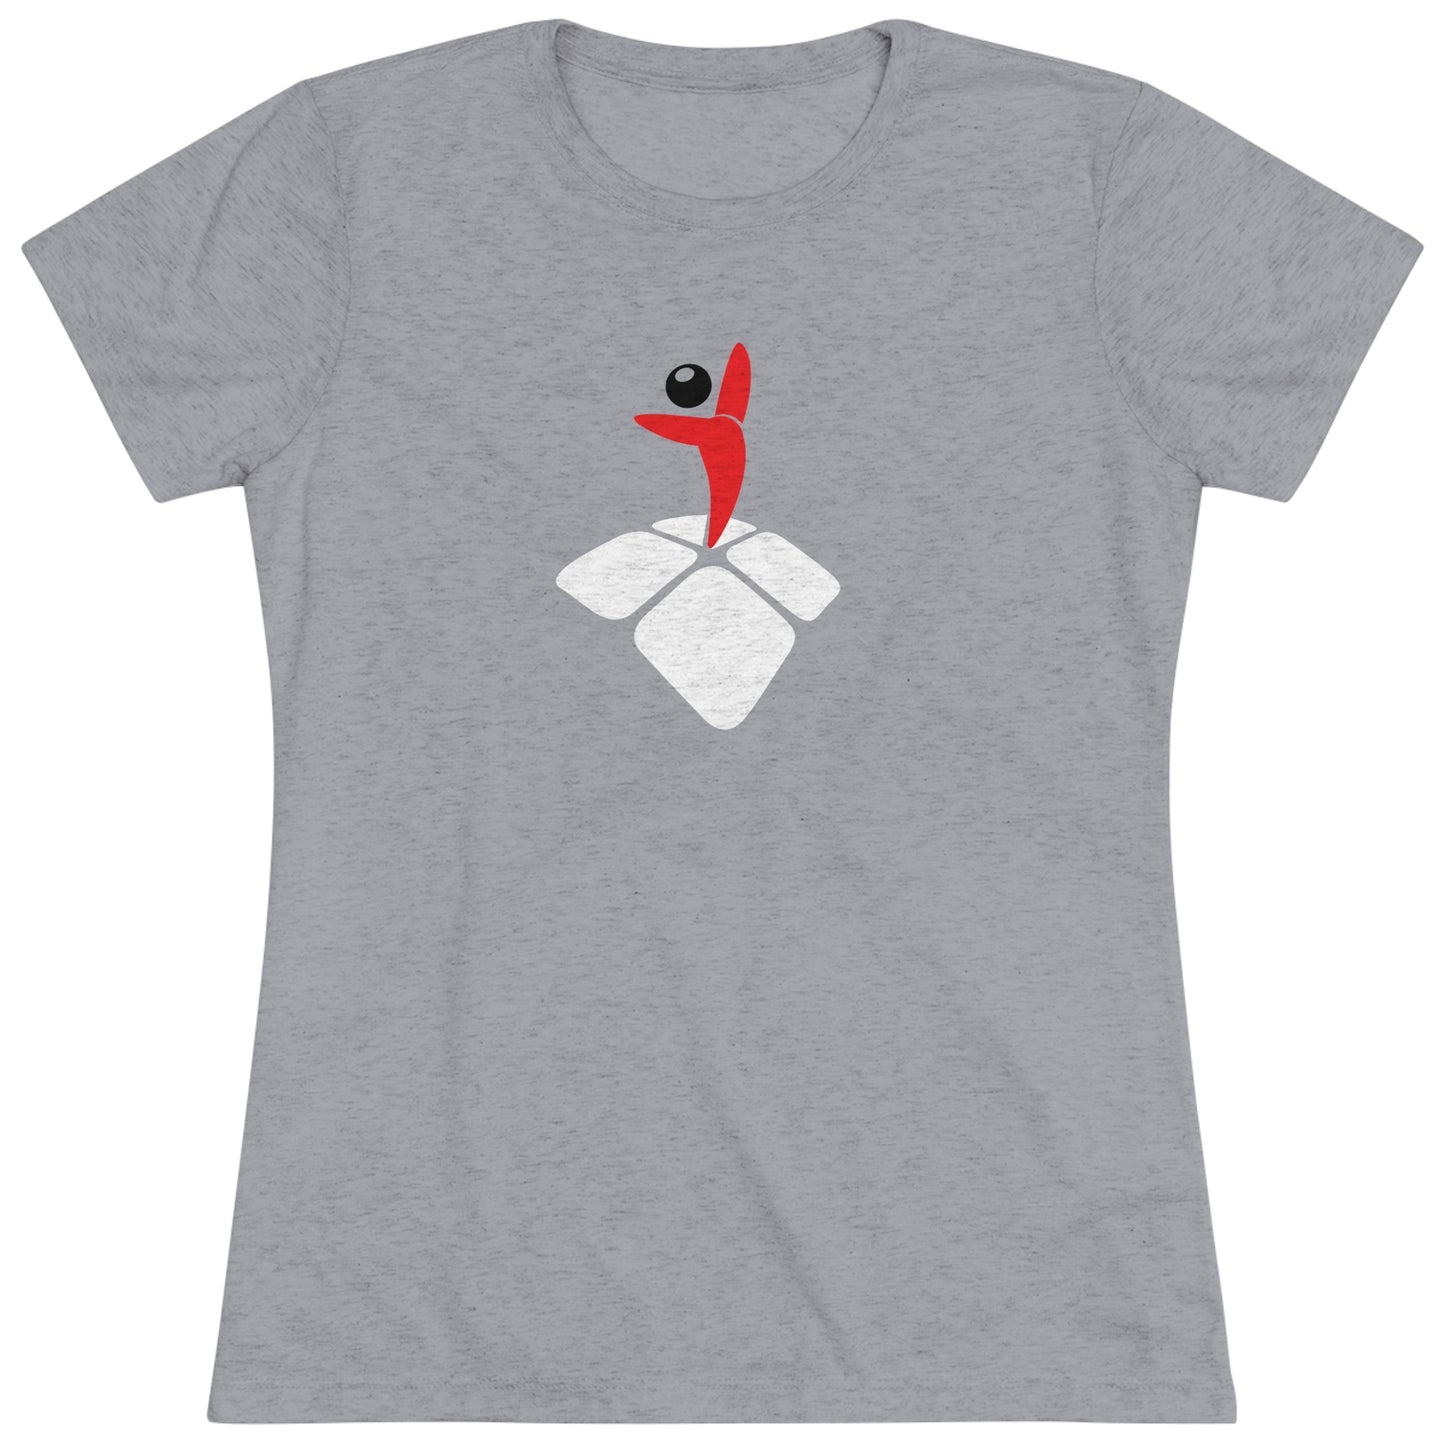 THE BOUNCE CLUB ICON-Women's Triblend Tee